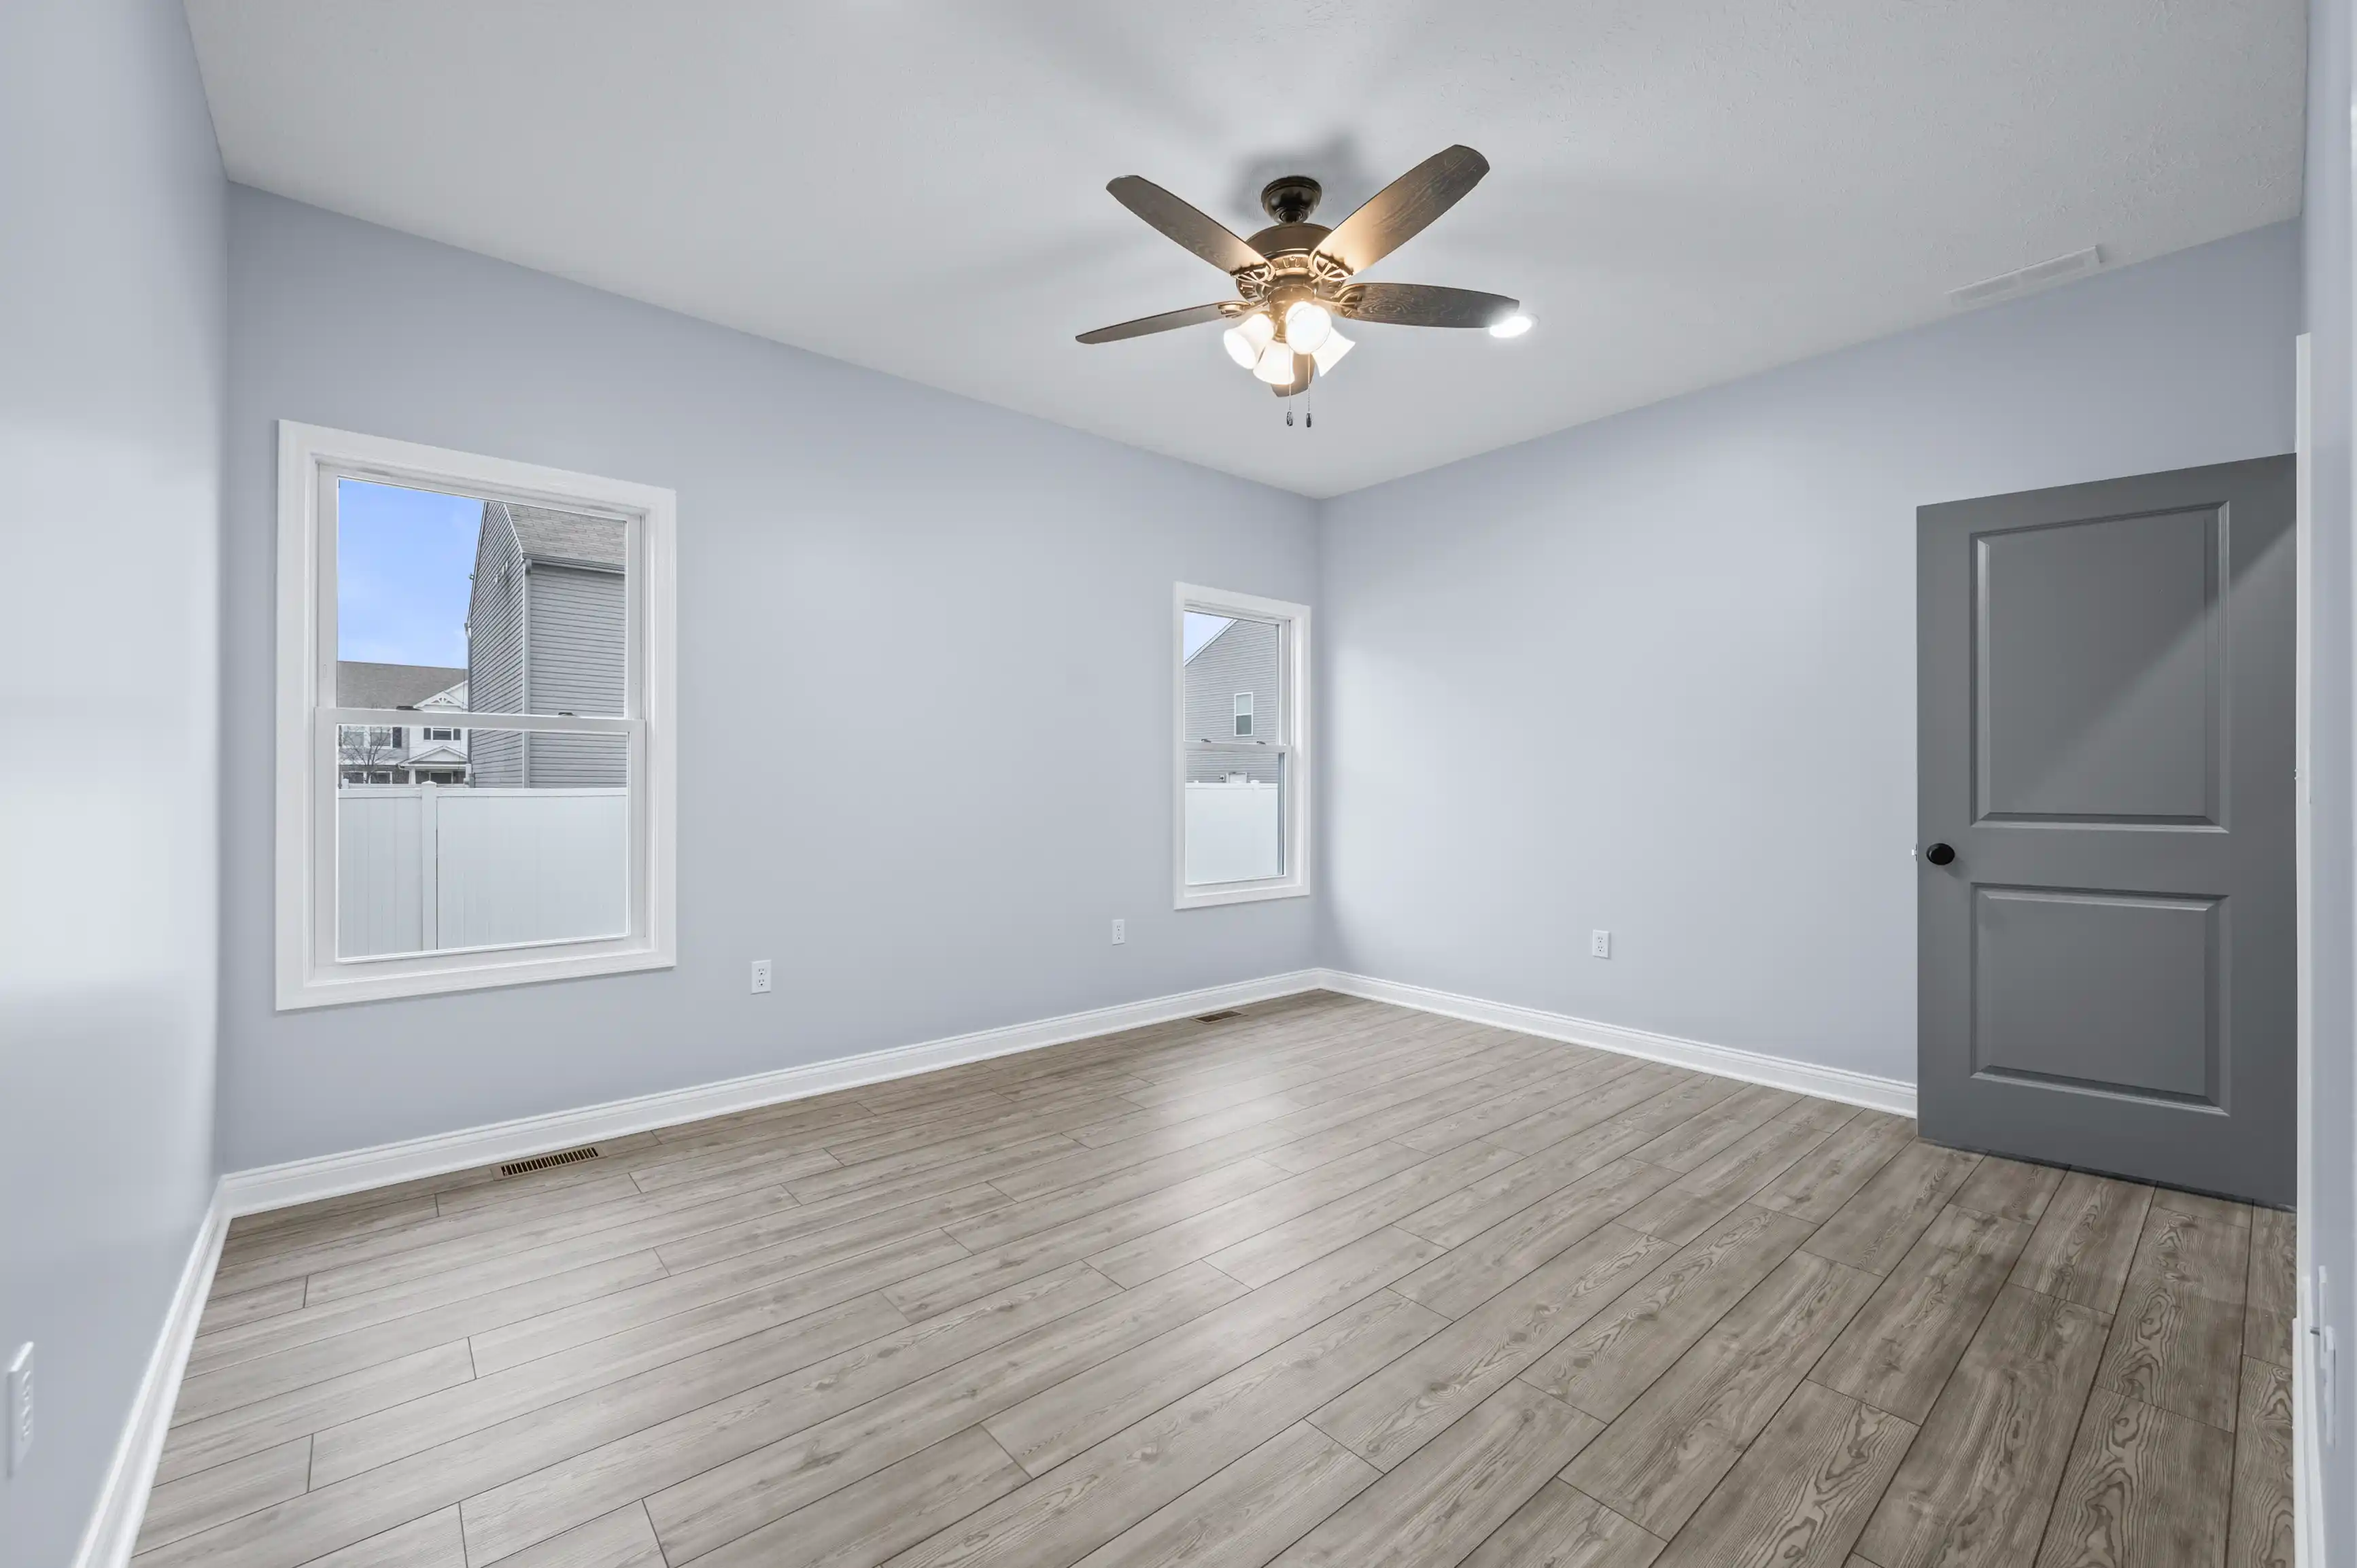 Spacious empty room with light gray walls, hardwood floors, two windows, and a ceiling fan with lights.